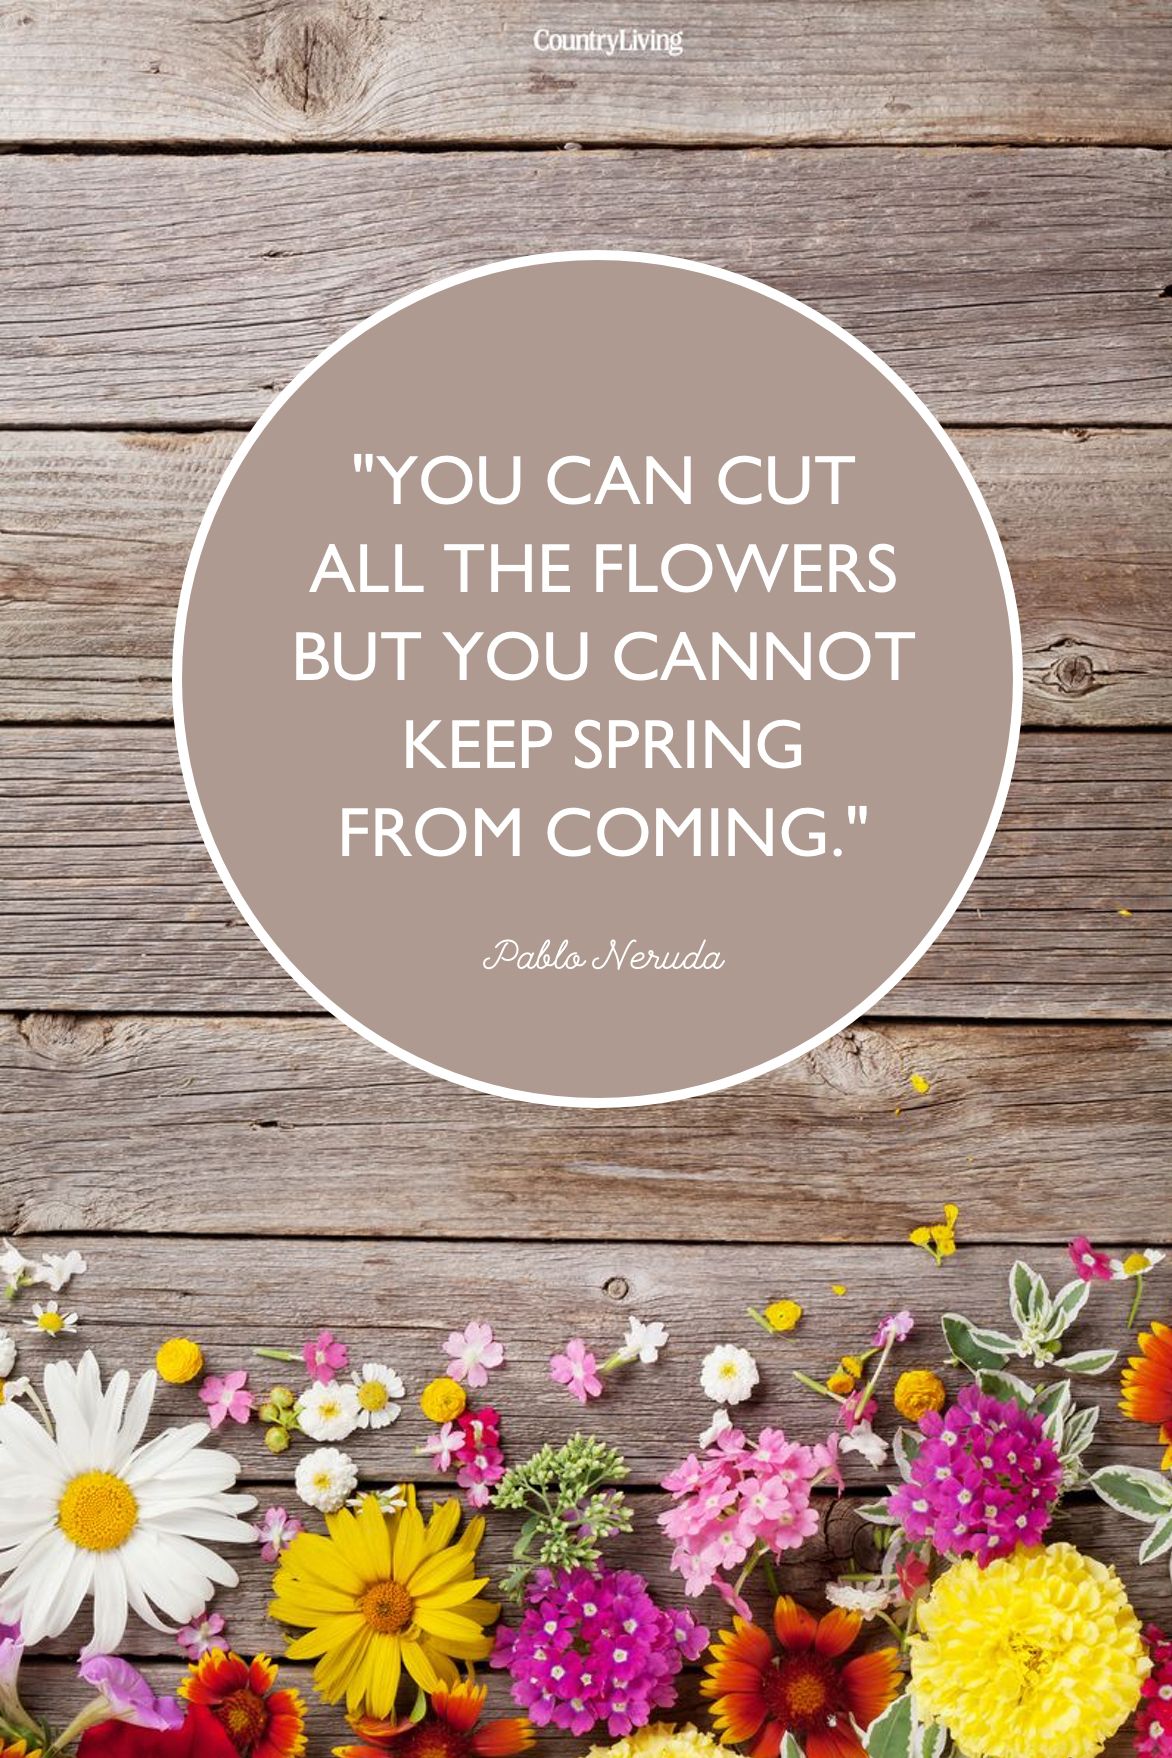 40 Best Happy Spring Quotes Motivational Sayings About Spring